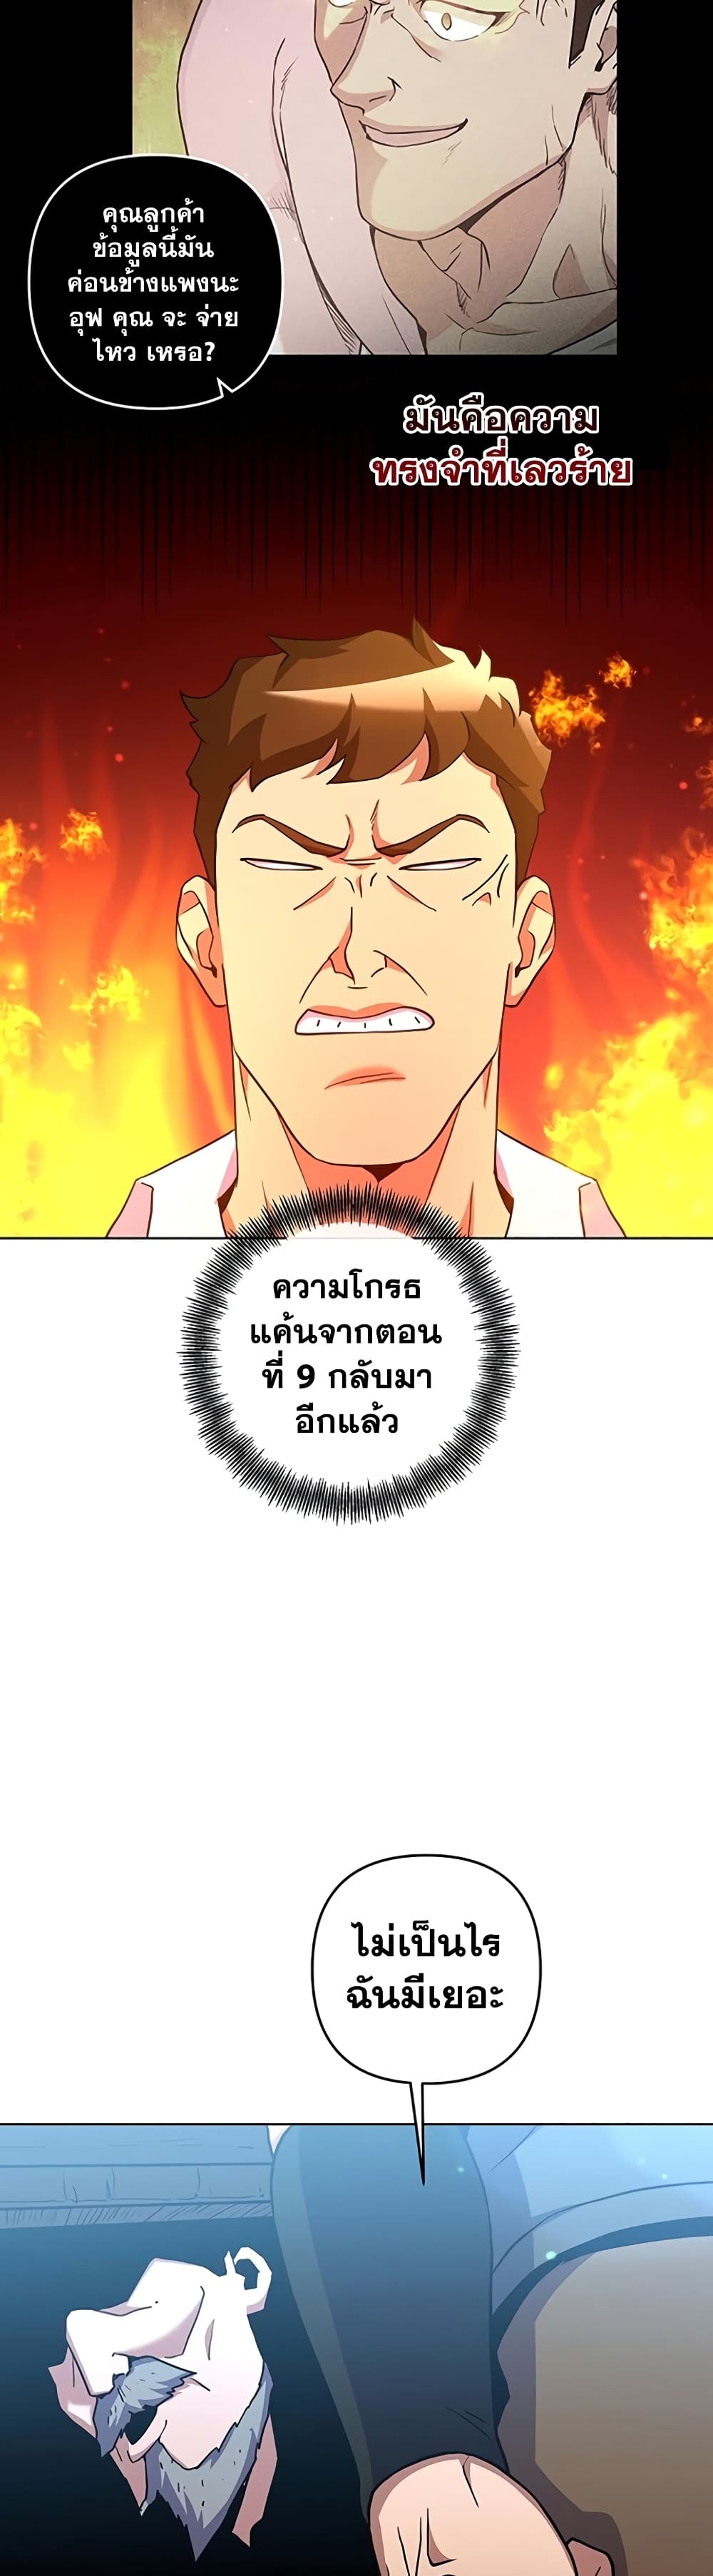 Surviving in an Action Manhwa 18 33